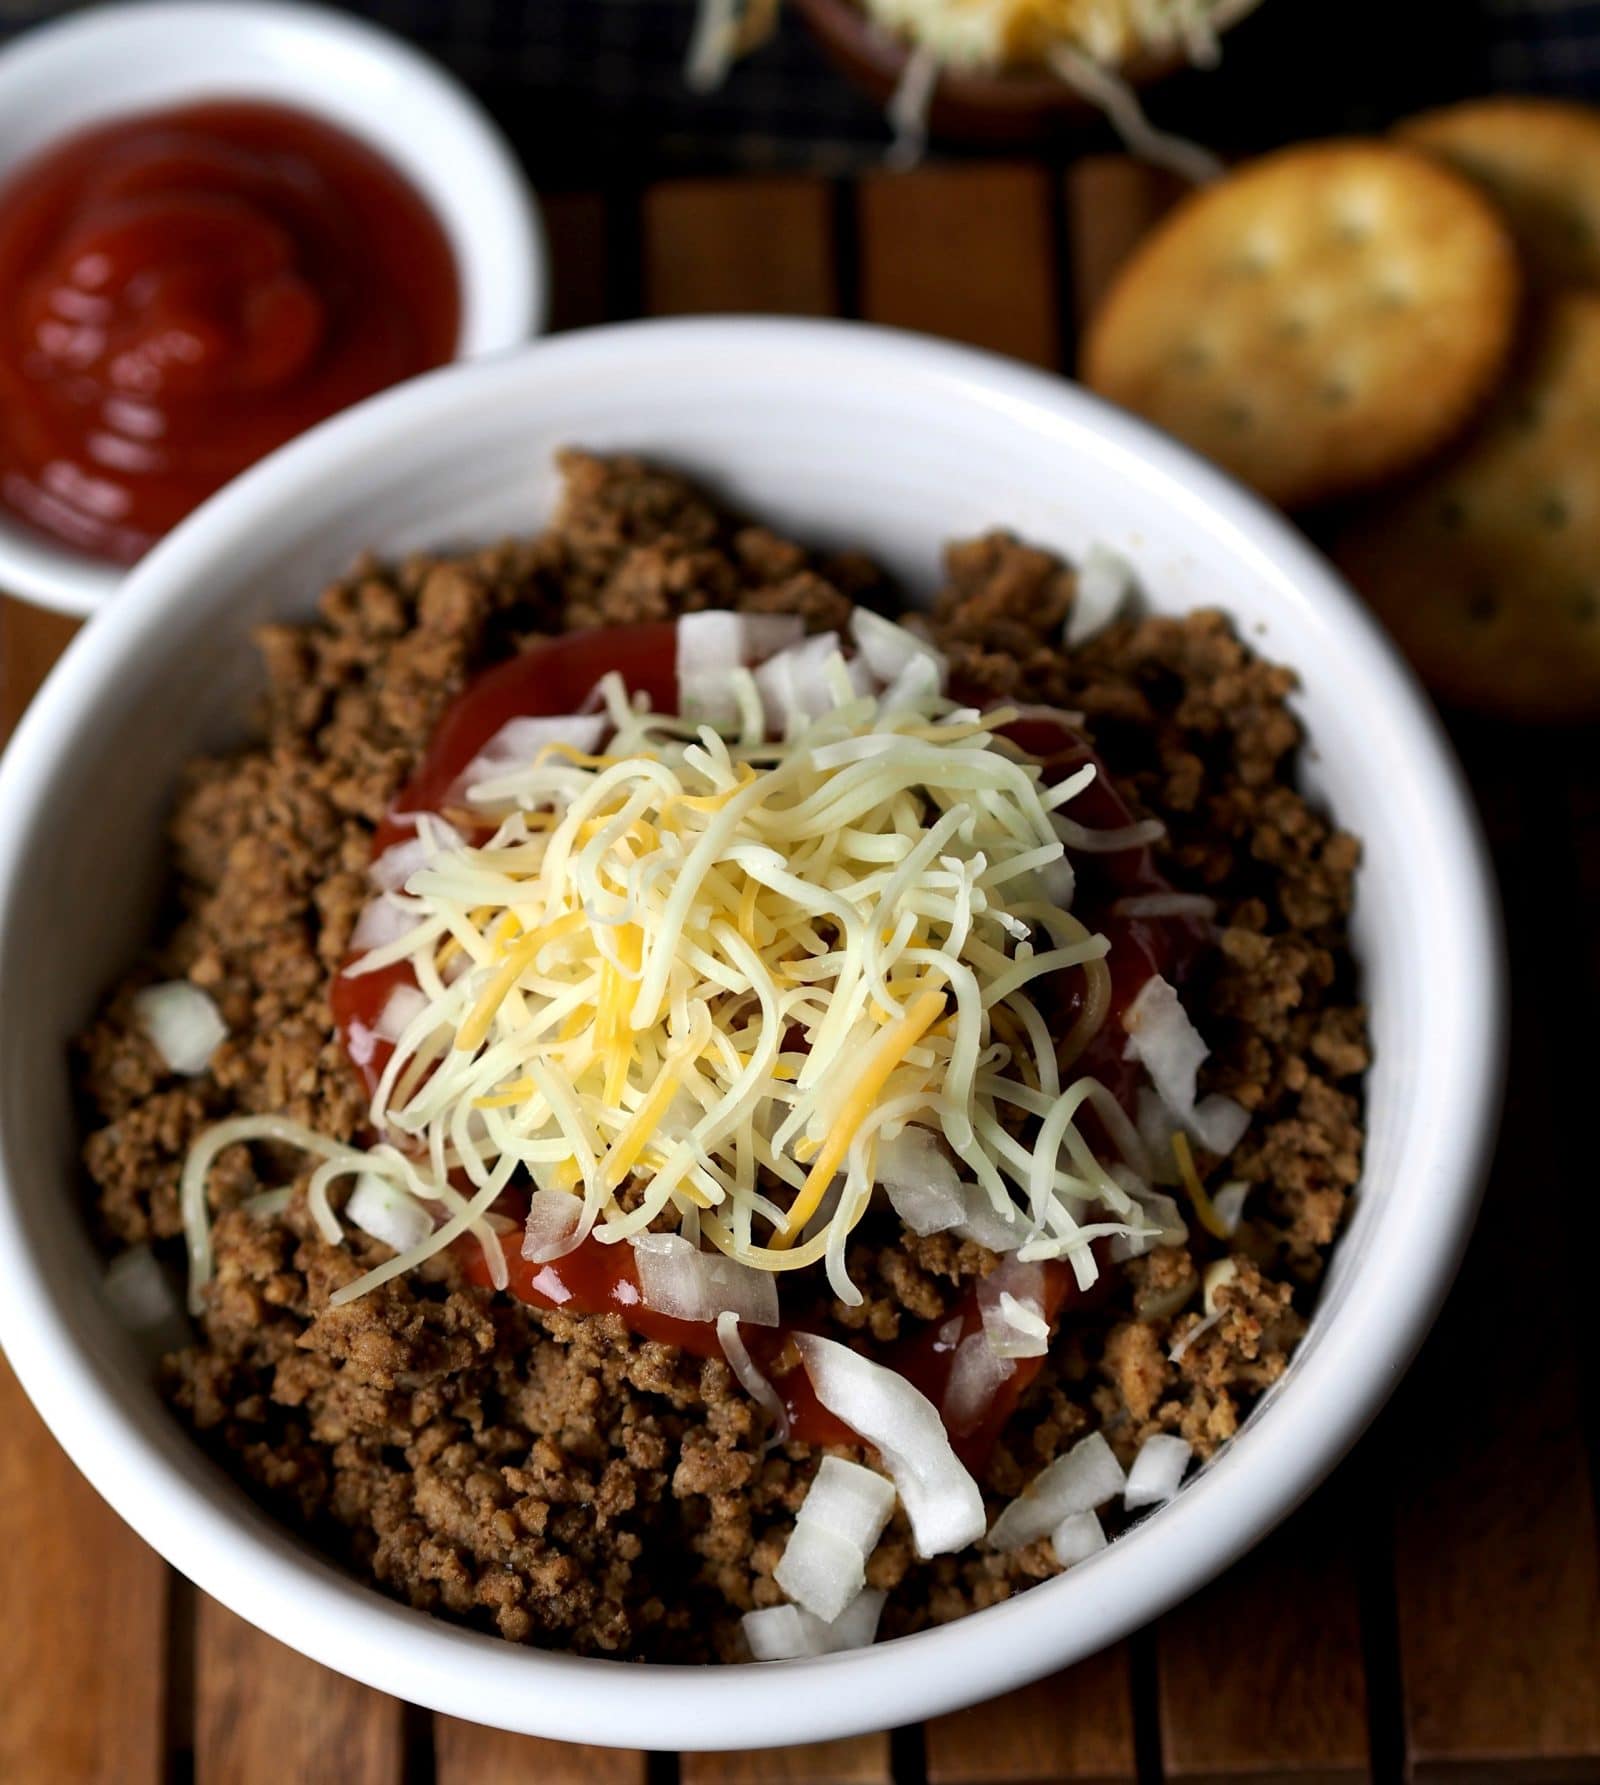 Copycat Dixon's Chili & Tamale Spread. Enjoy eating President Truman's favorite Dixon's Chili Parlor chili at home. Founded in 1919 & still going strong. Simply Sated